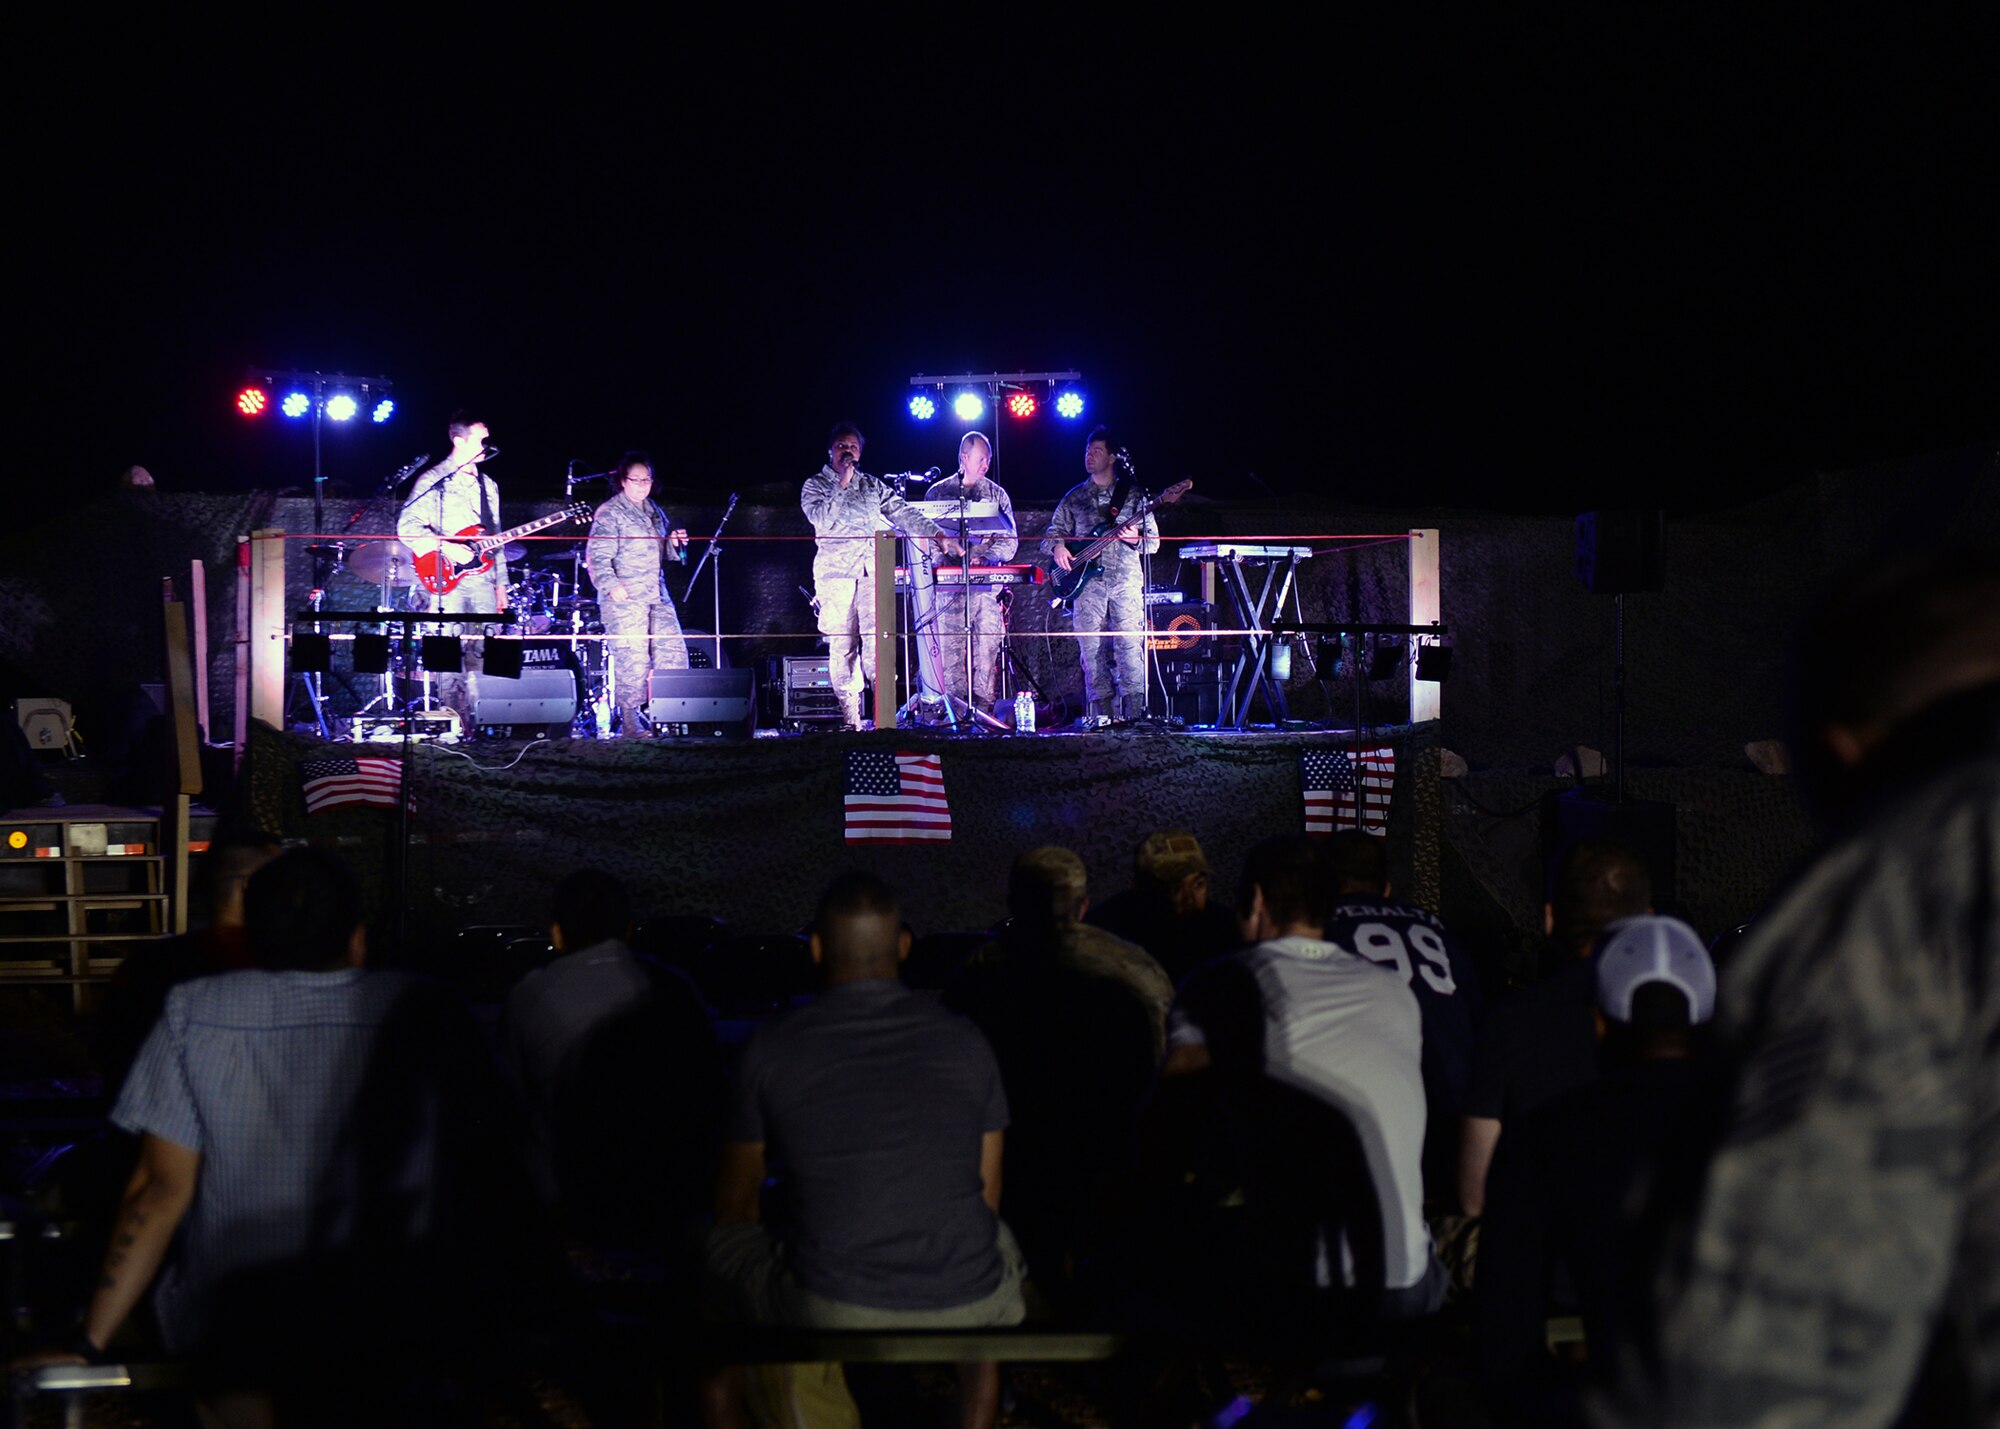 Deployed Airmen attend a band performance at Nigerien Air Base 201 Agadez, Niger, March 10, 2017. A United States Air Forces in Europe Band ensemble, known as Touch ‘n Go, performed the first musical entertainment event held at Air Base 201 to build Airmen morale and enhance military partnerships between the U.S. Air Force and Forces Armées Nigeriennes. (U.S. Air Force photo by Senior Airman Jimmie D. Pike)